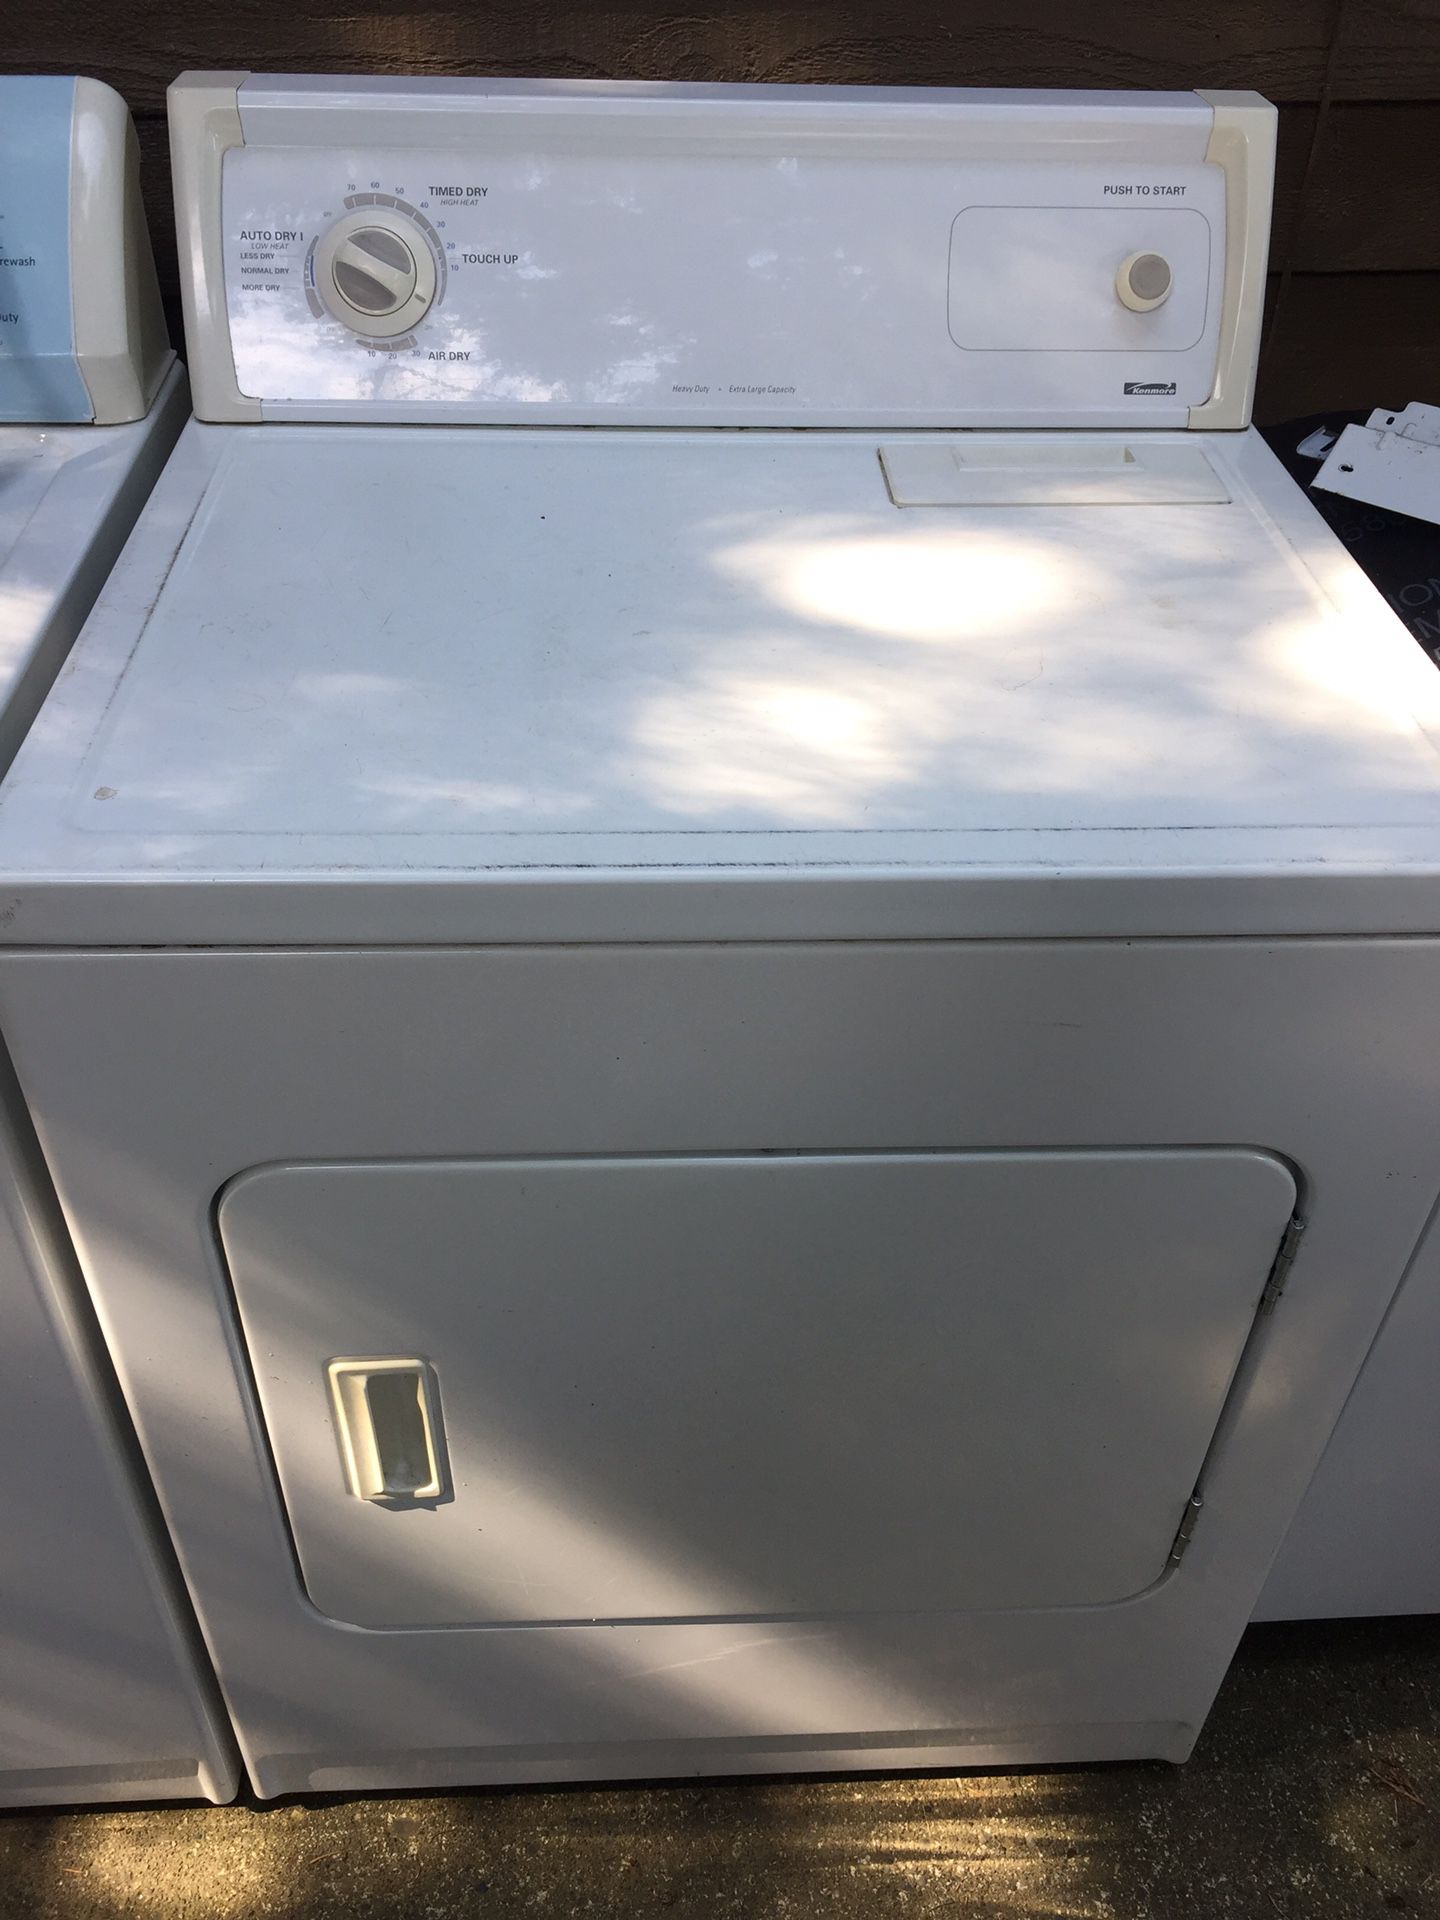 Matching kenmore washer and dryer set